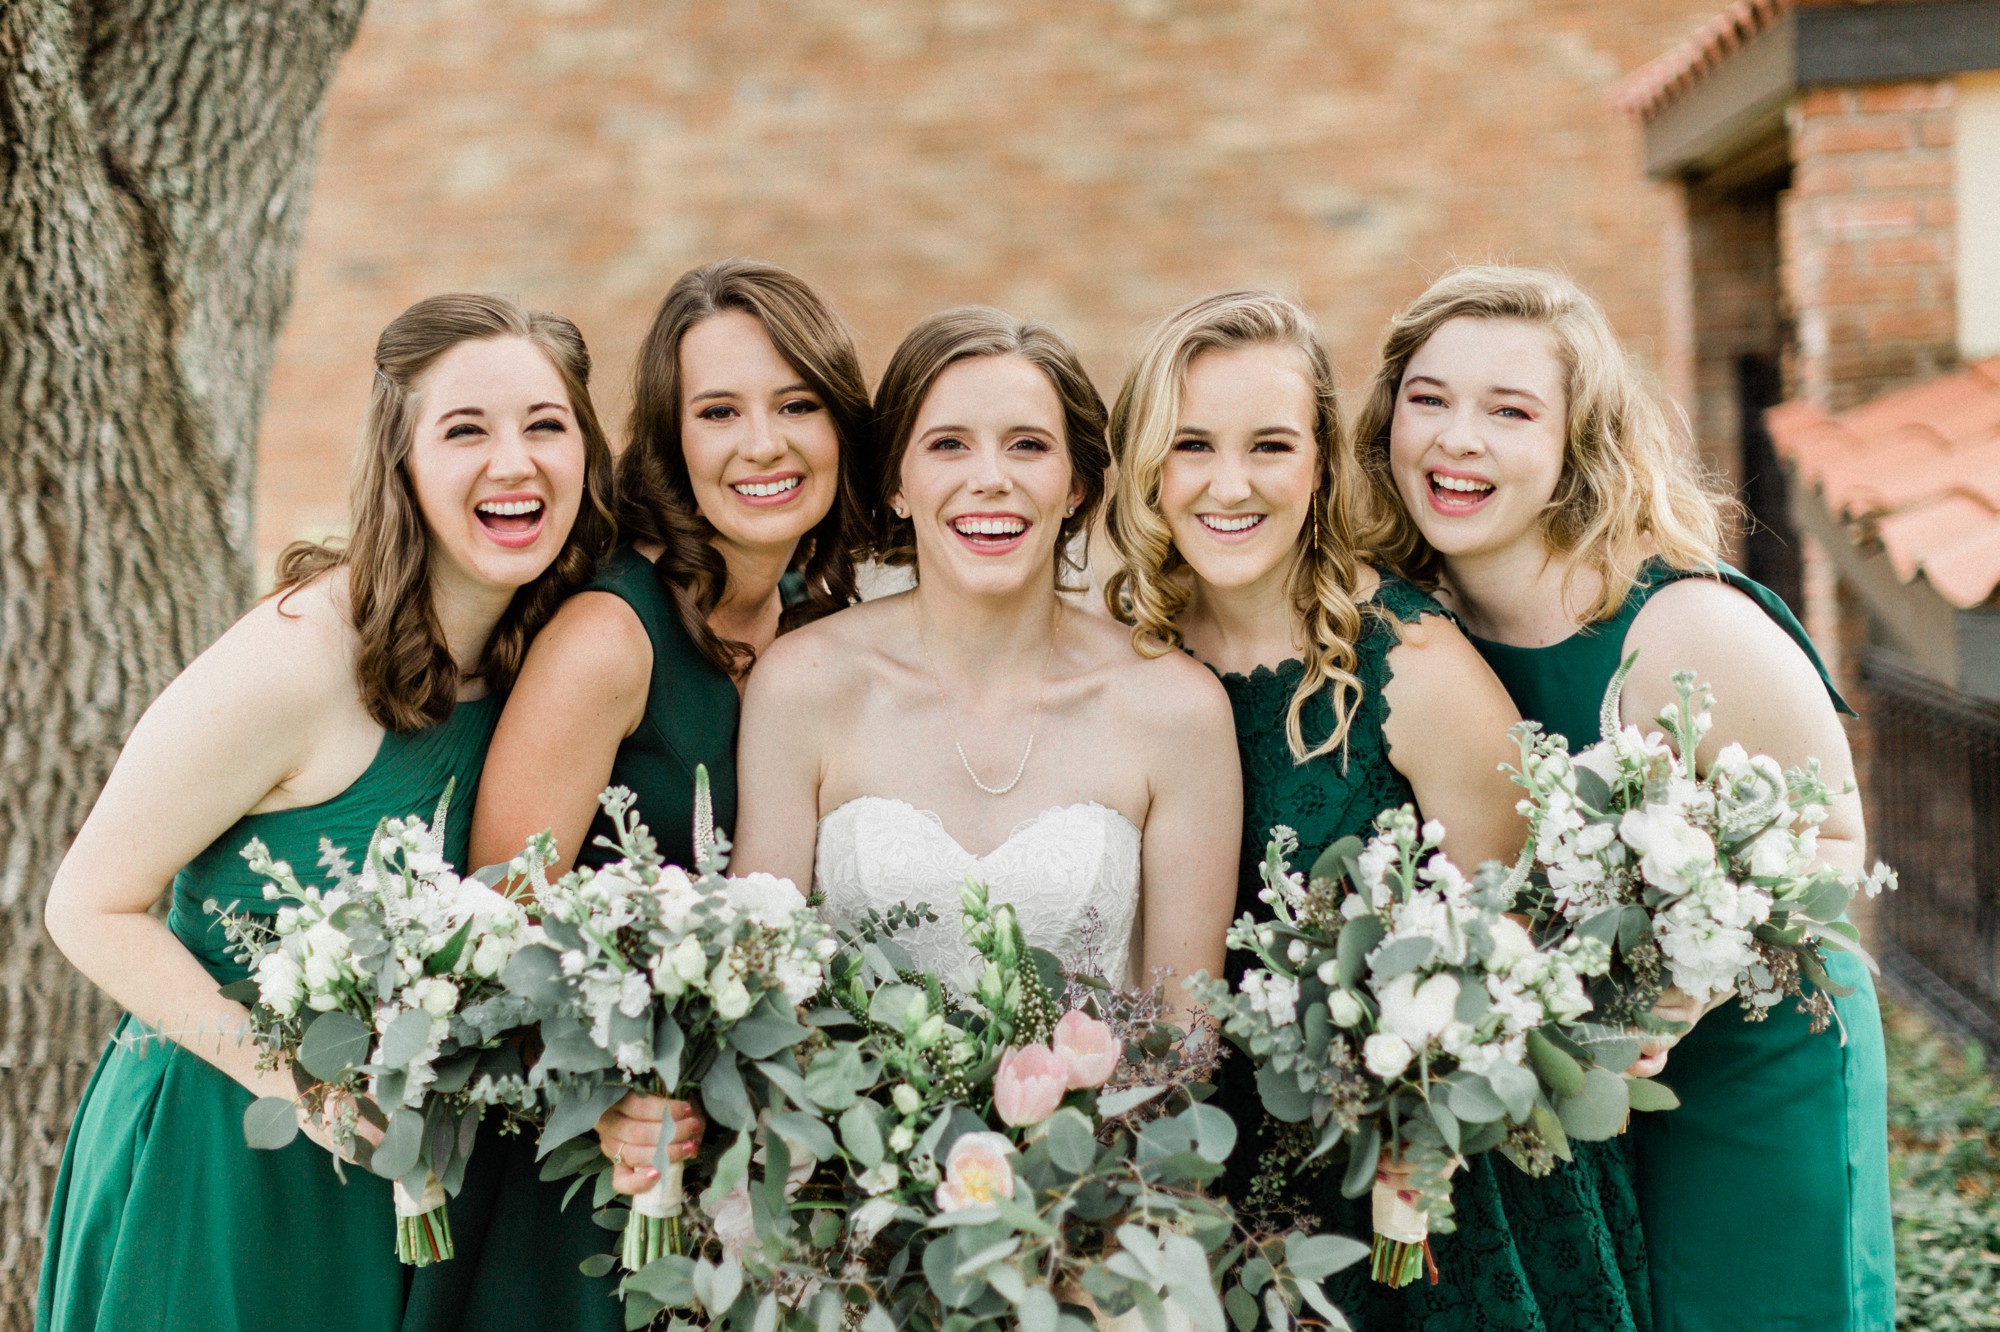 bride and bridesmaid, bhldn dress, emerald green bridesmaid, poison ivy floral design, spring wedding photo, the gallery, houston, texas, dreamy elk photography and design